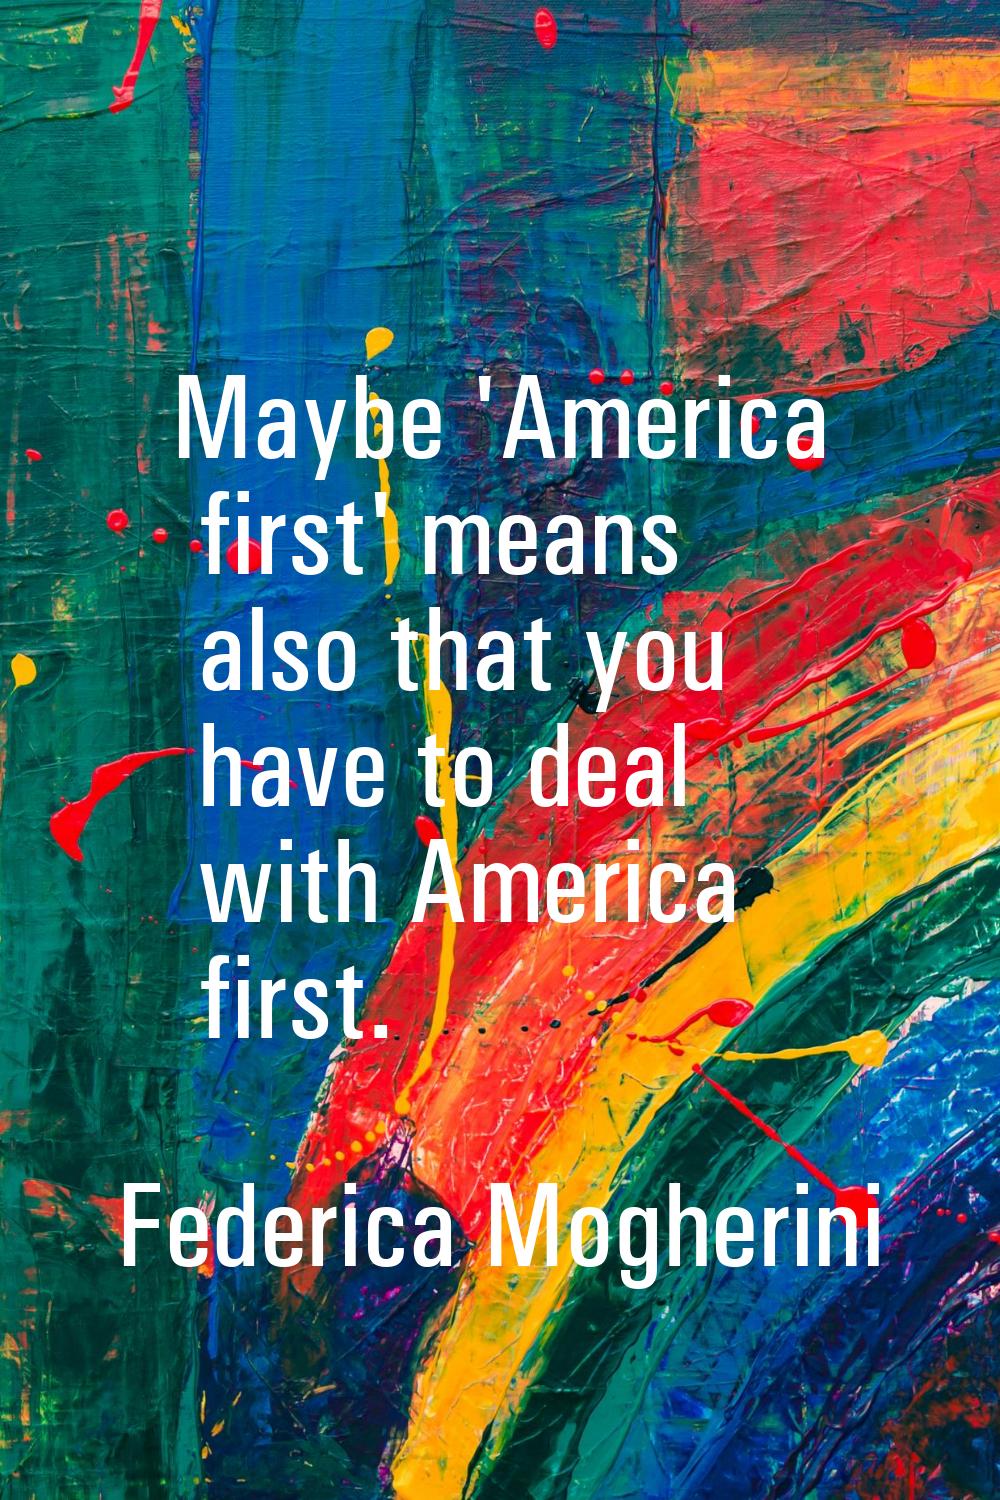 Maybe 'America first' means also that you have to deal with America first.